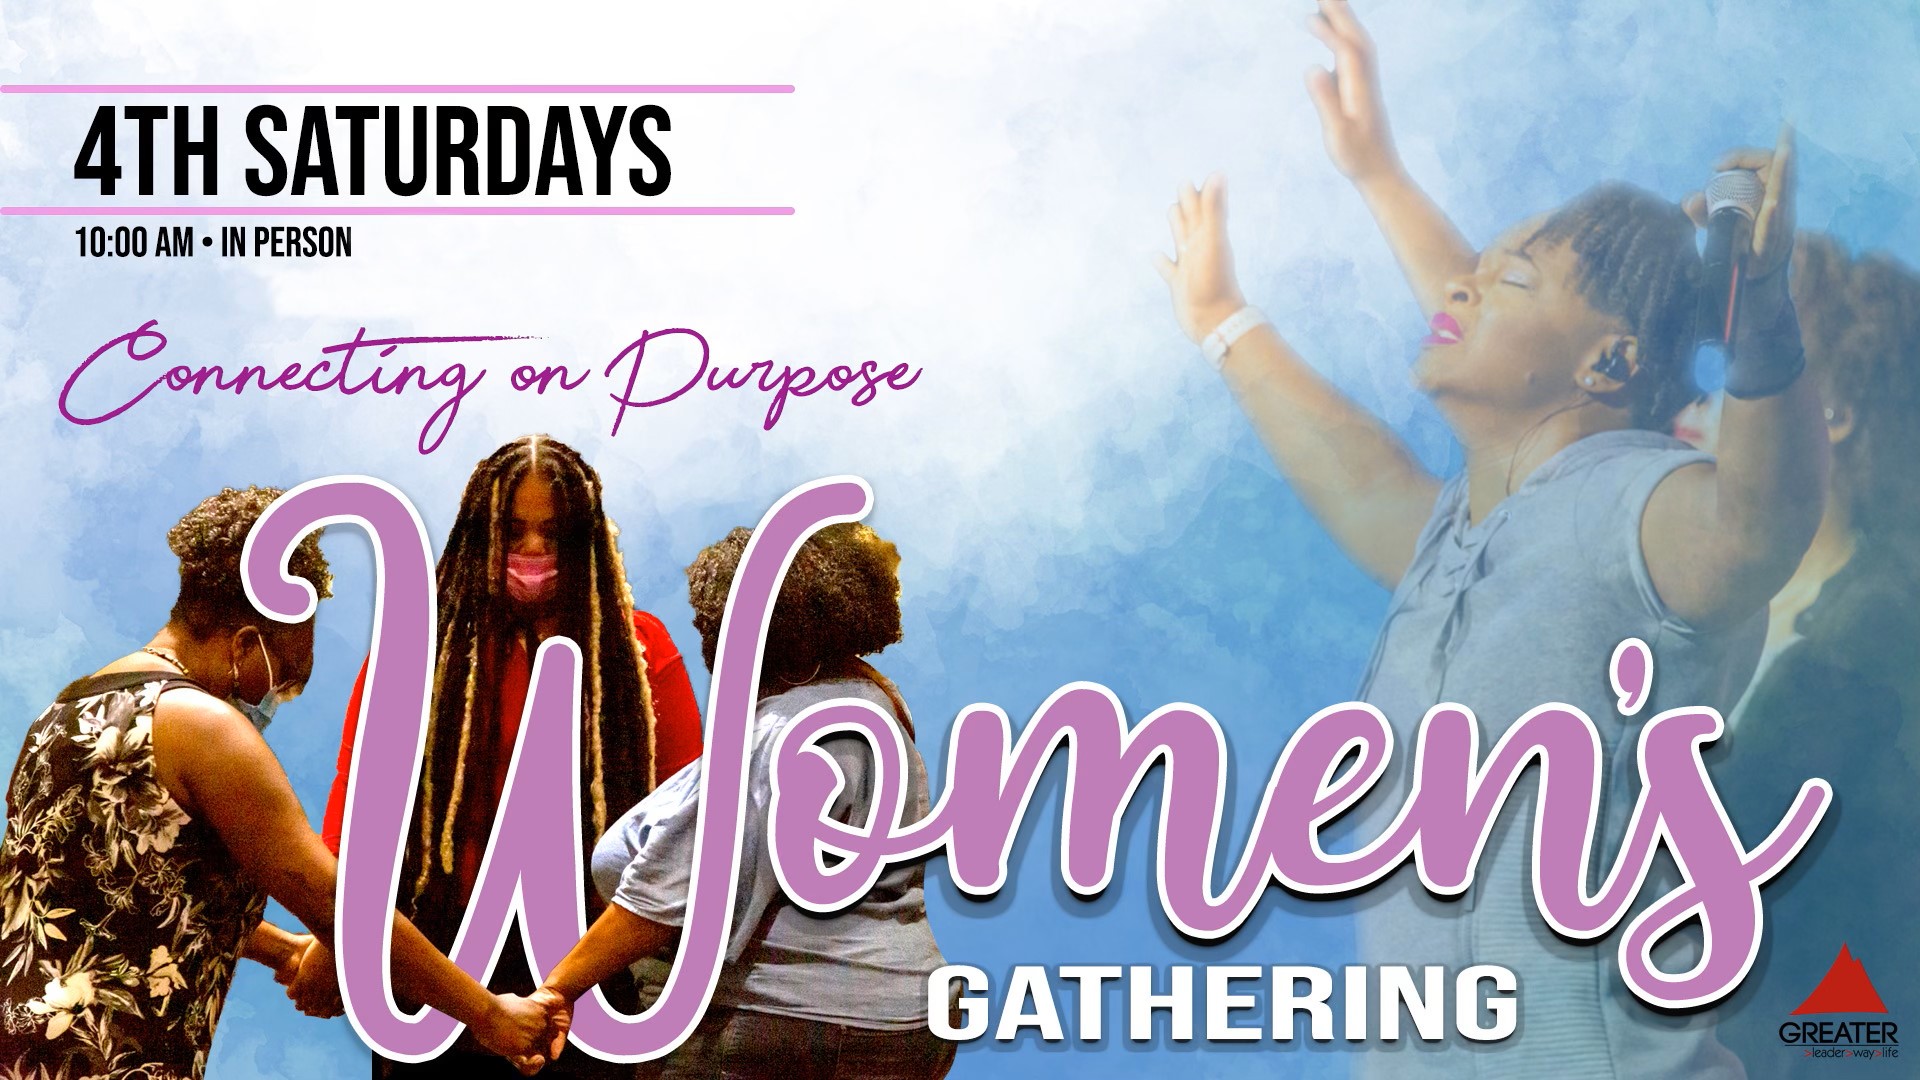 Featured image for Women’s Gathering